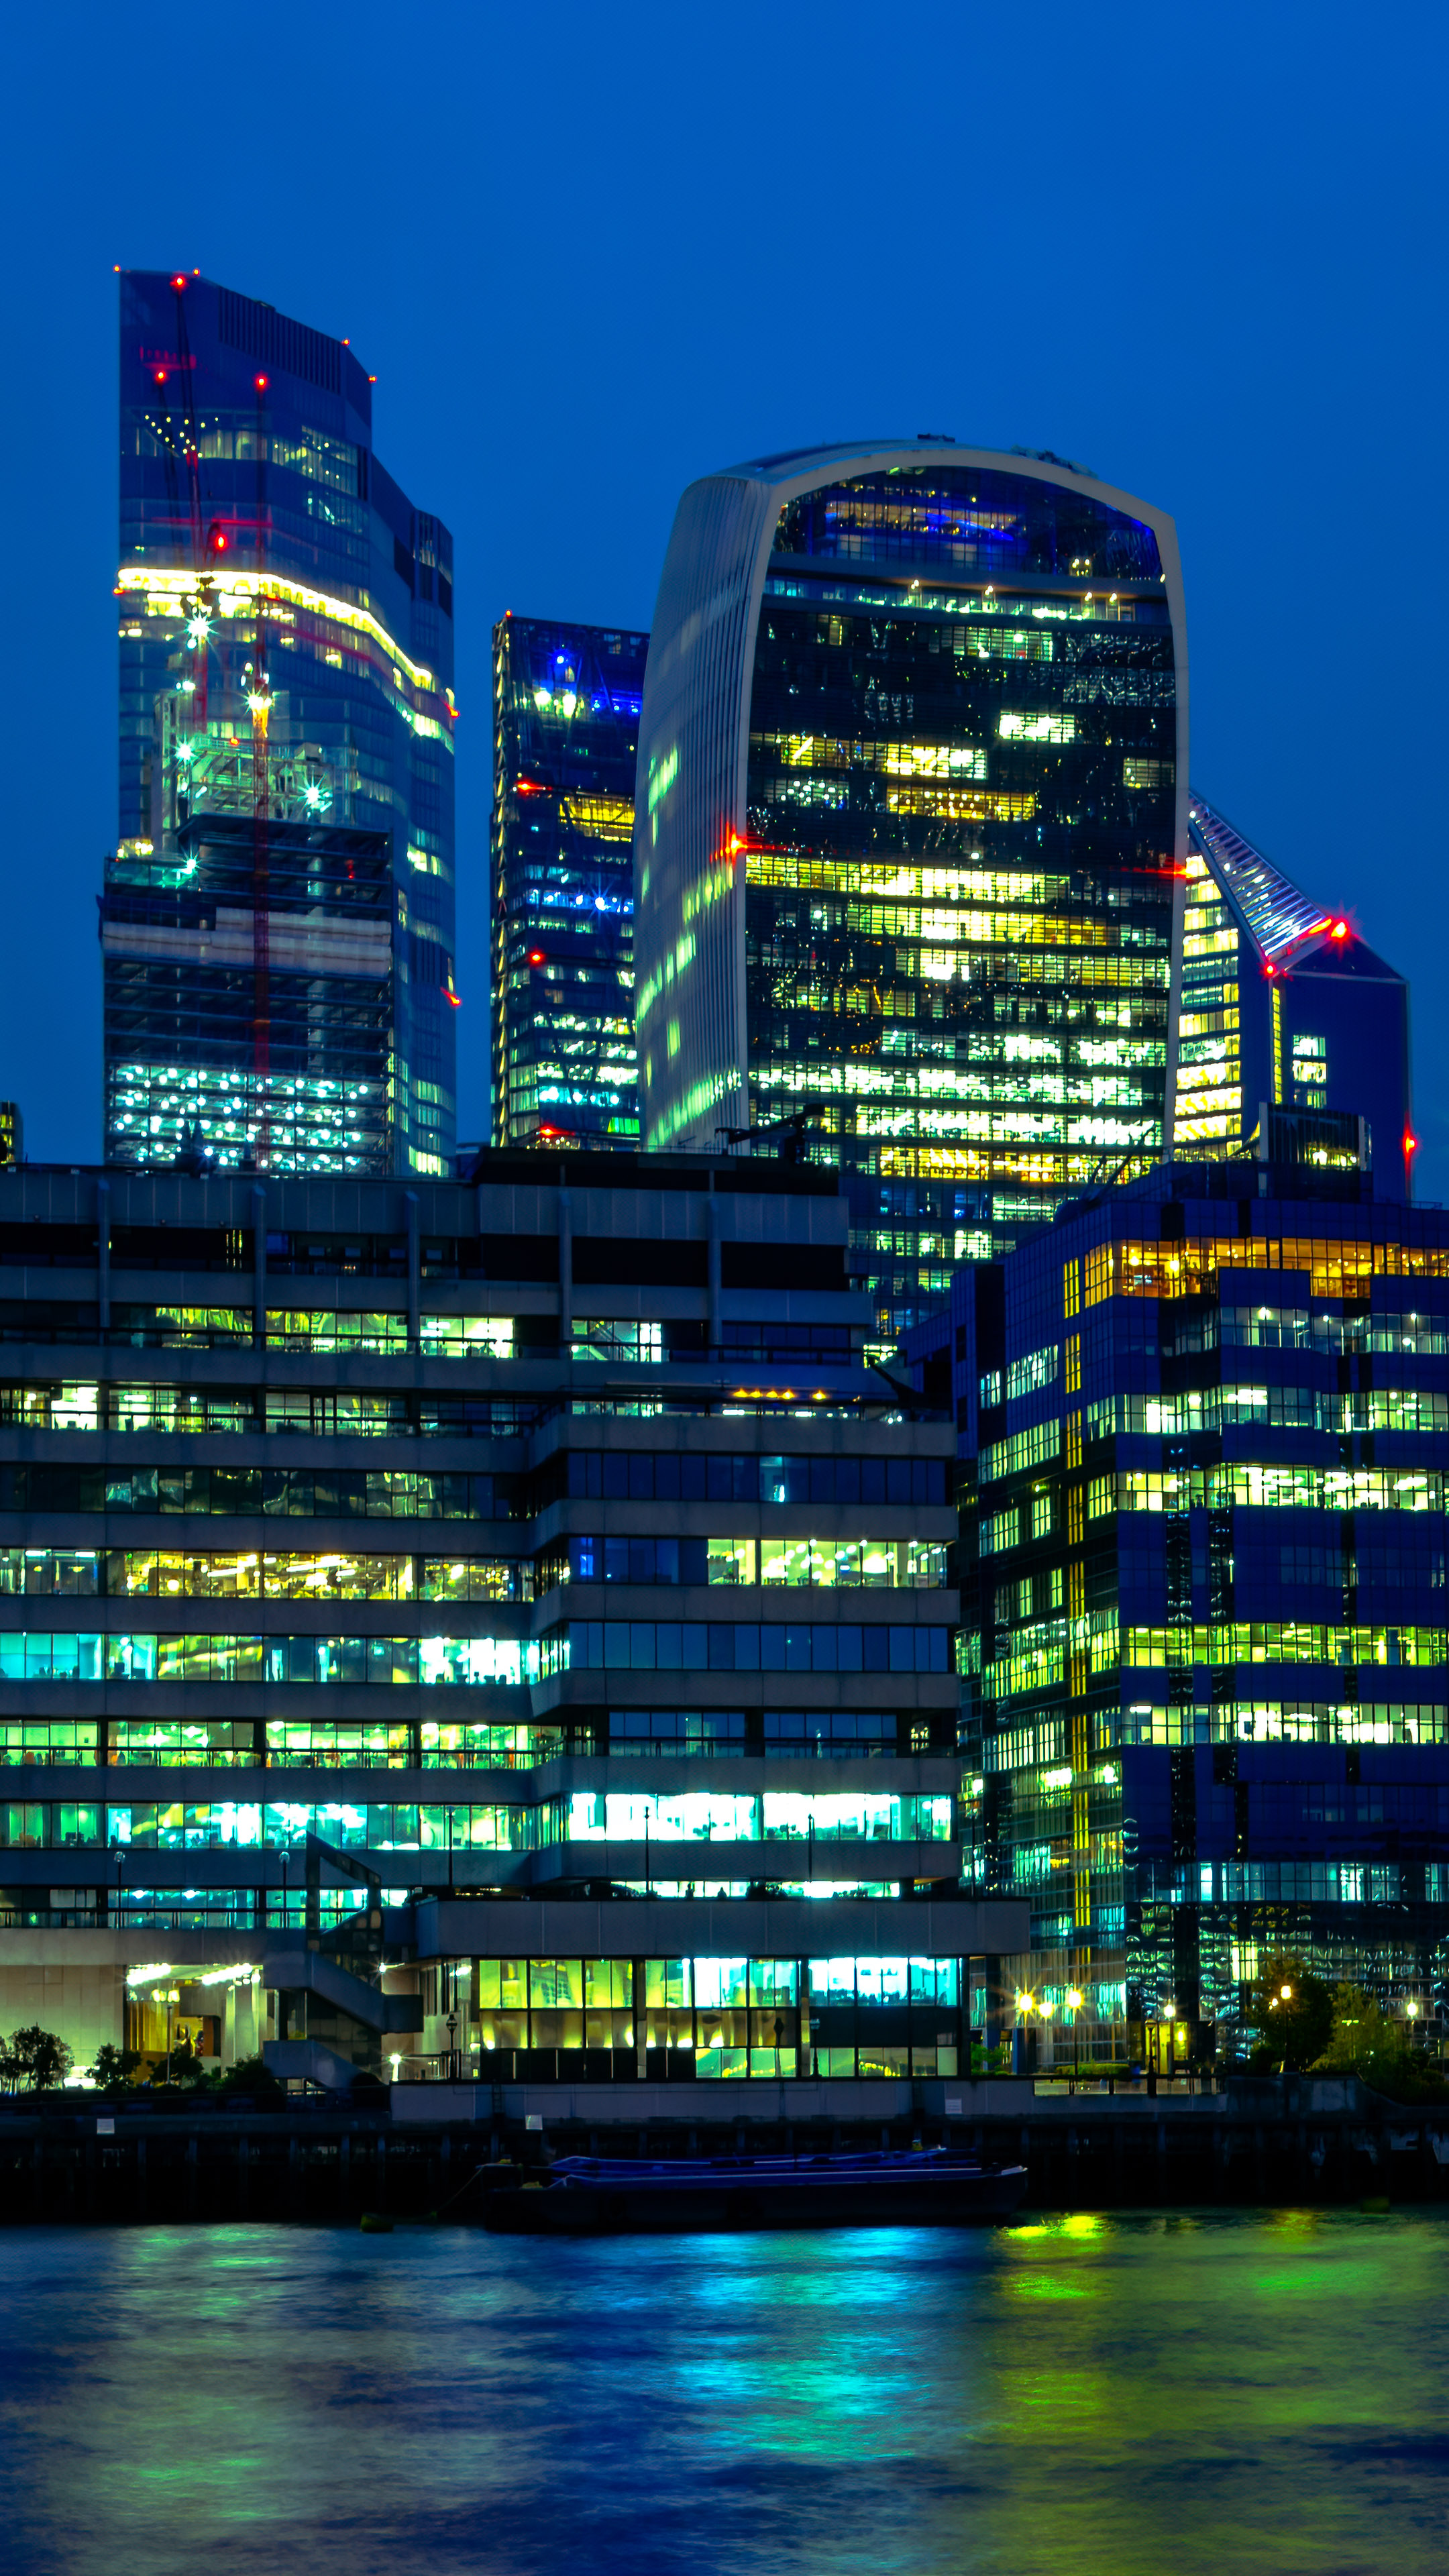 Illuminate your mobile screen with the dynamic city light wallpaper featuring London skyscrapers against a vibrant backdrop.